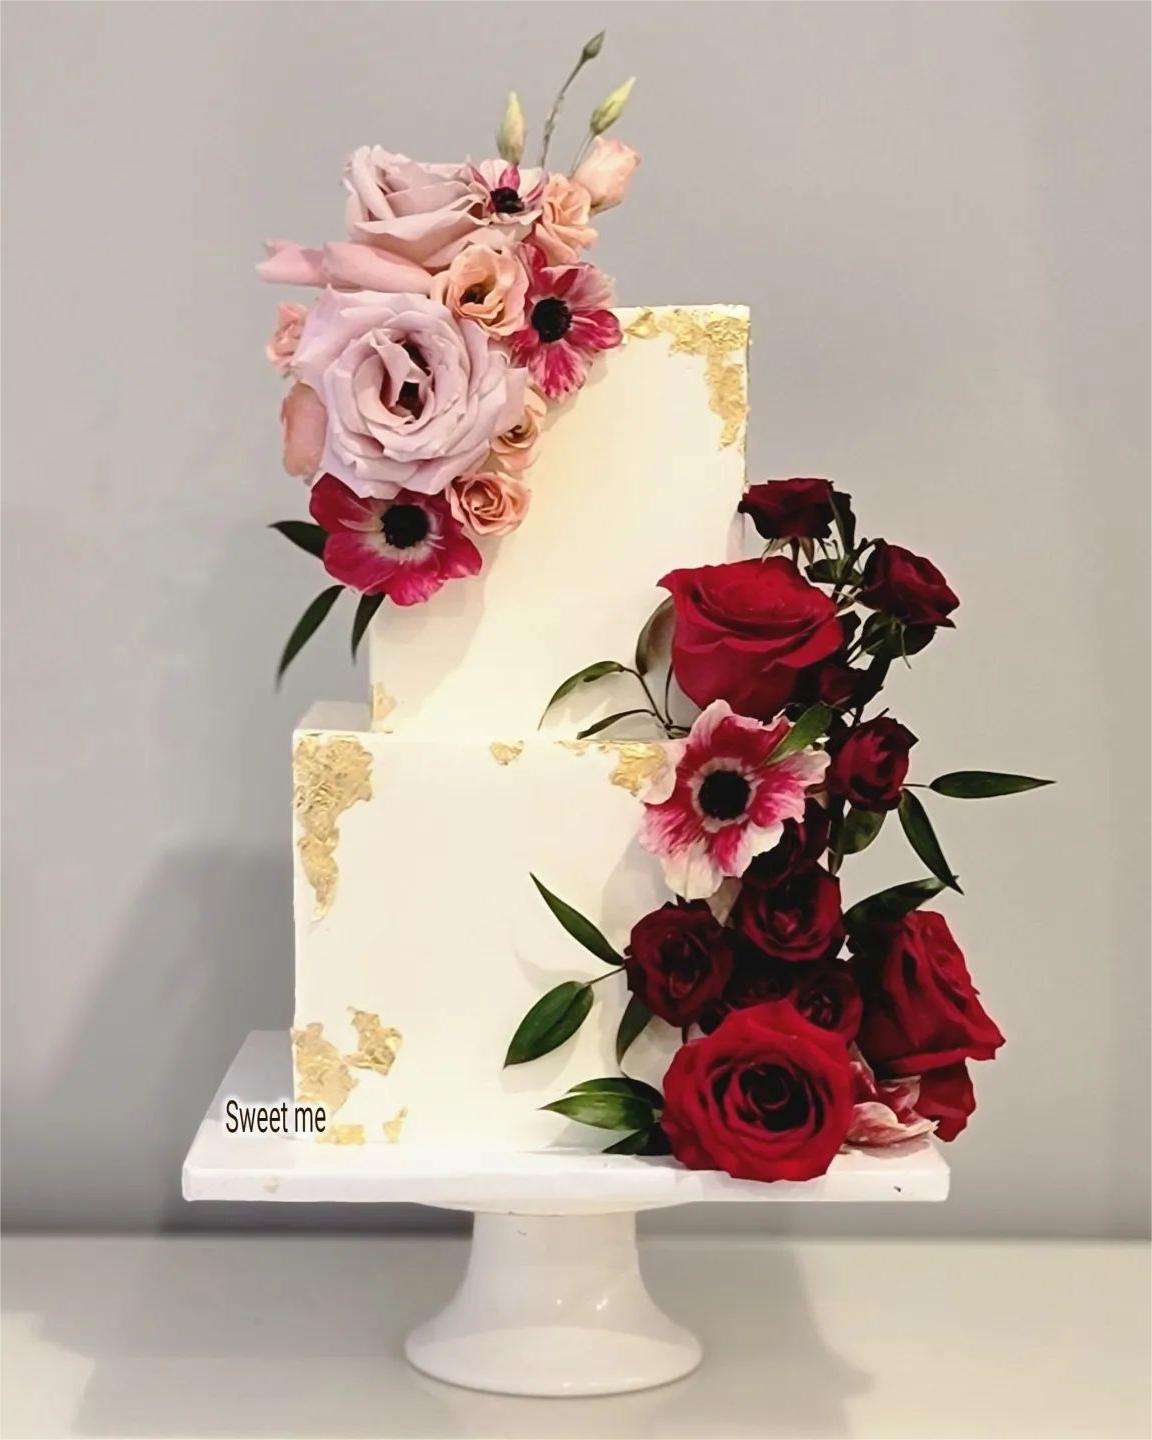 2 tier square wedding cake with dusty roses and burgundy flowers via sweetmedesserts